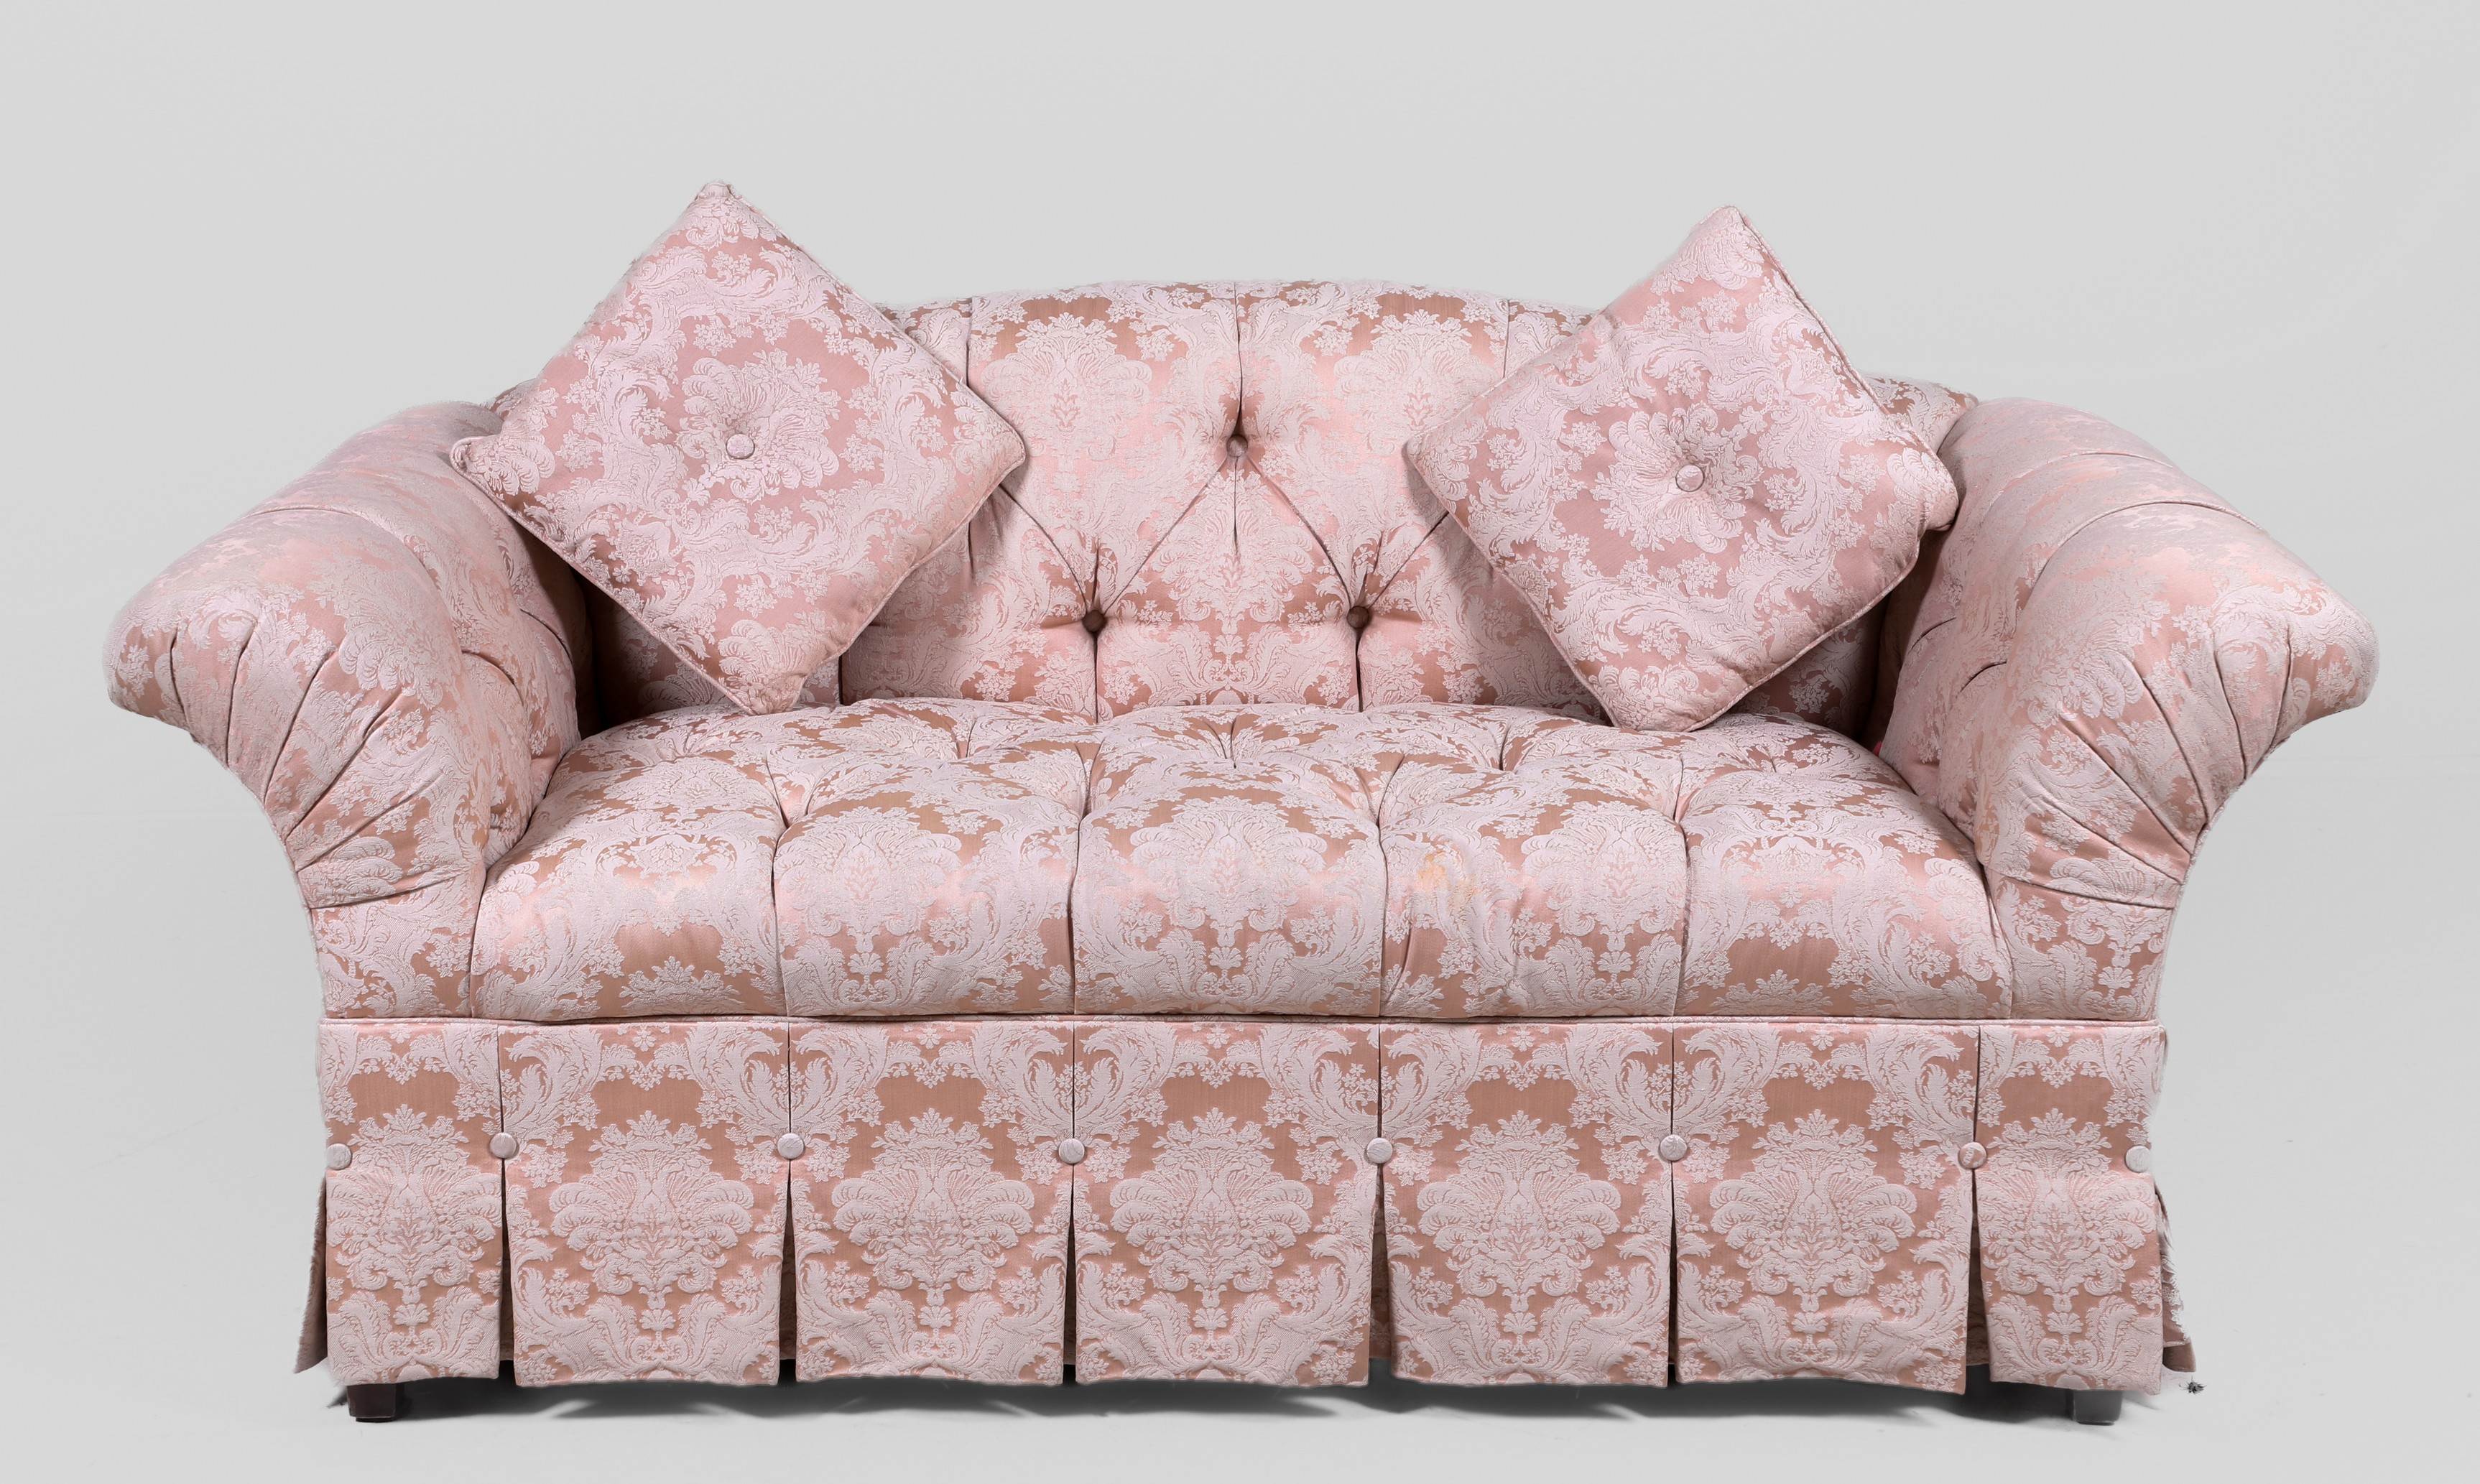 Tufted upholstered sofa, pink and cream